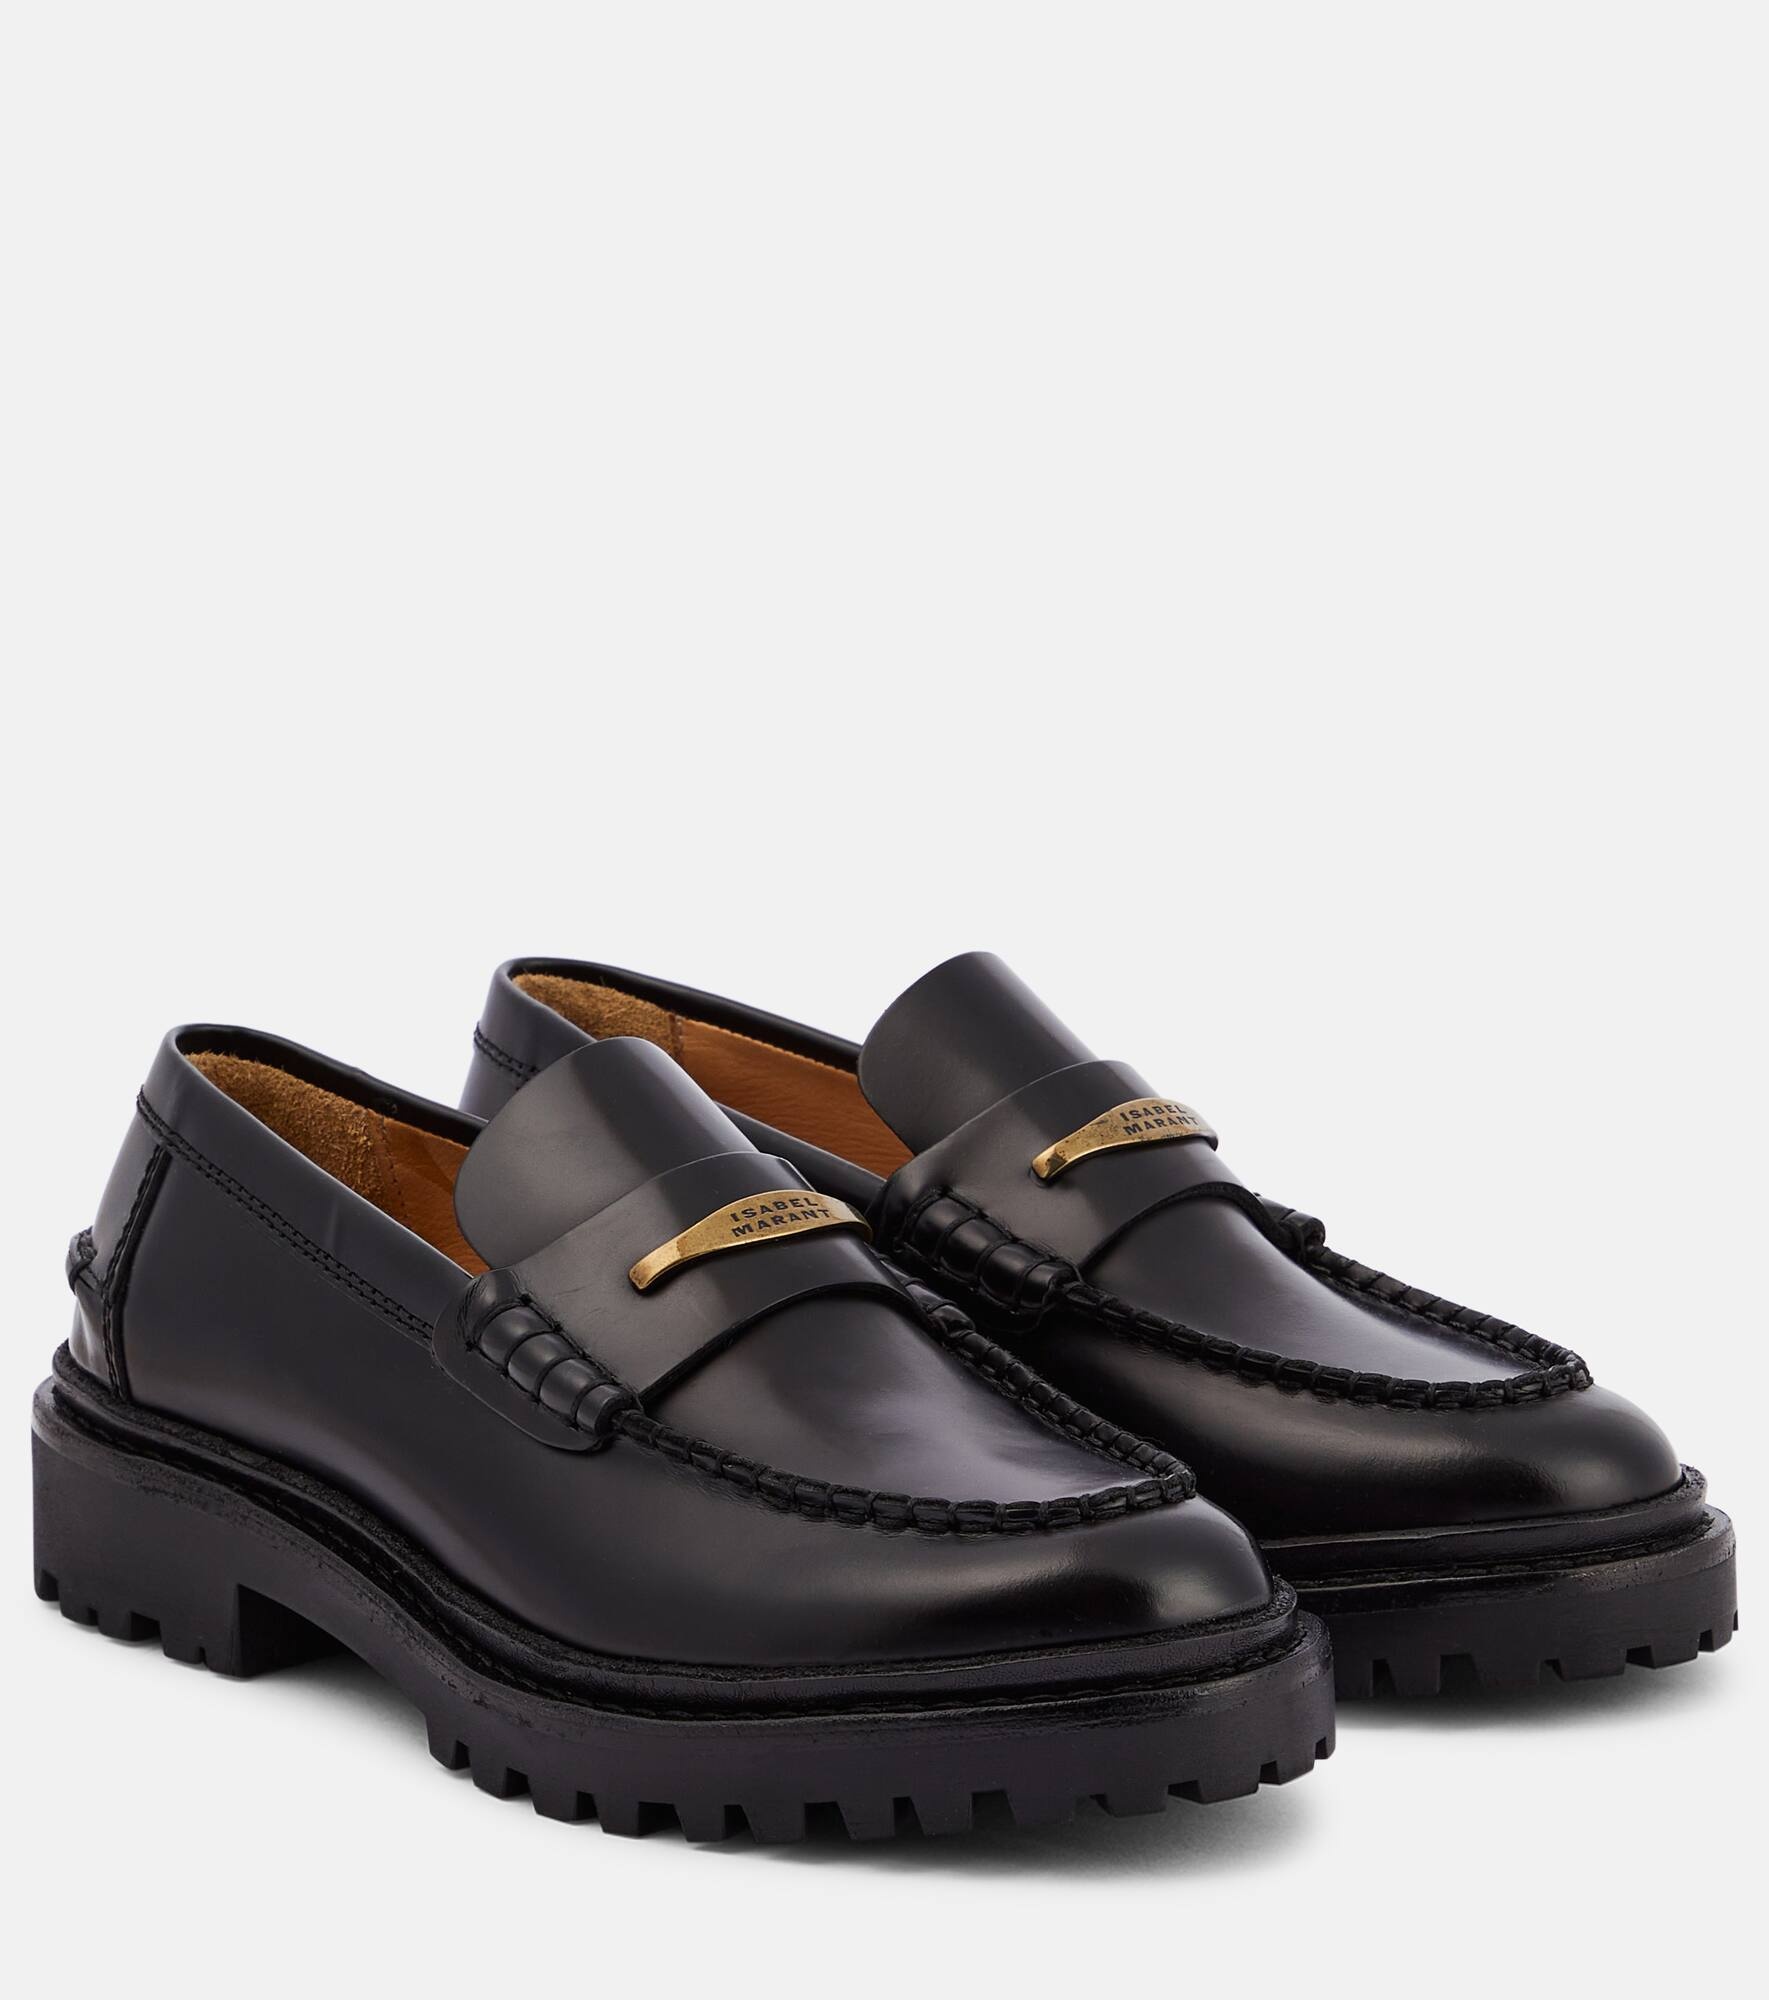 Frezza leather penny loafers - 1